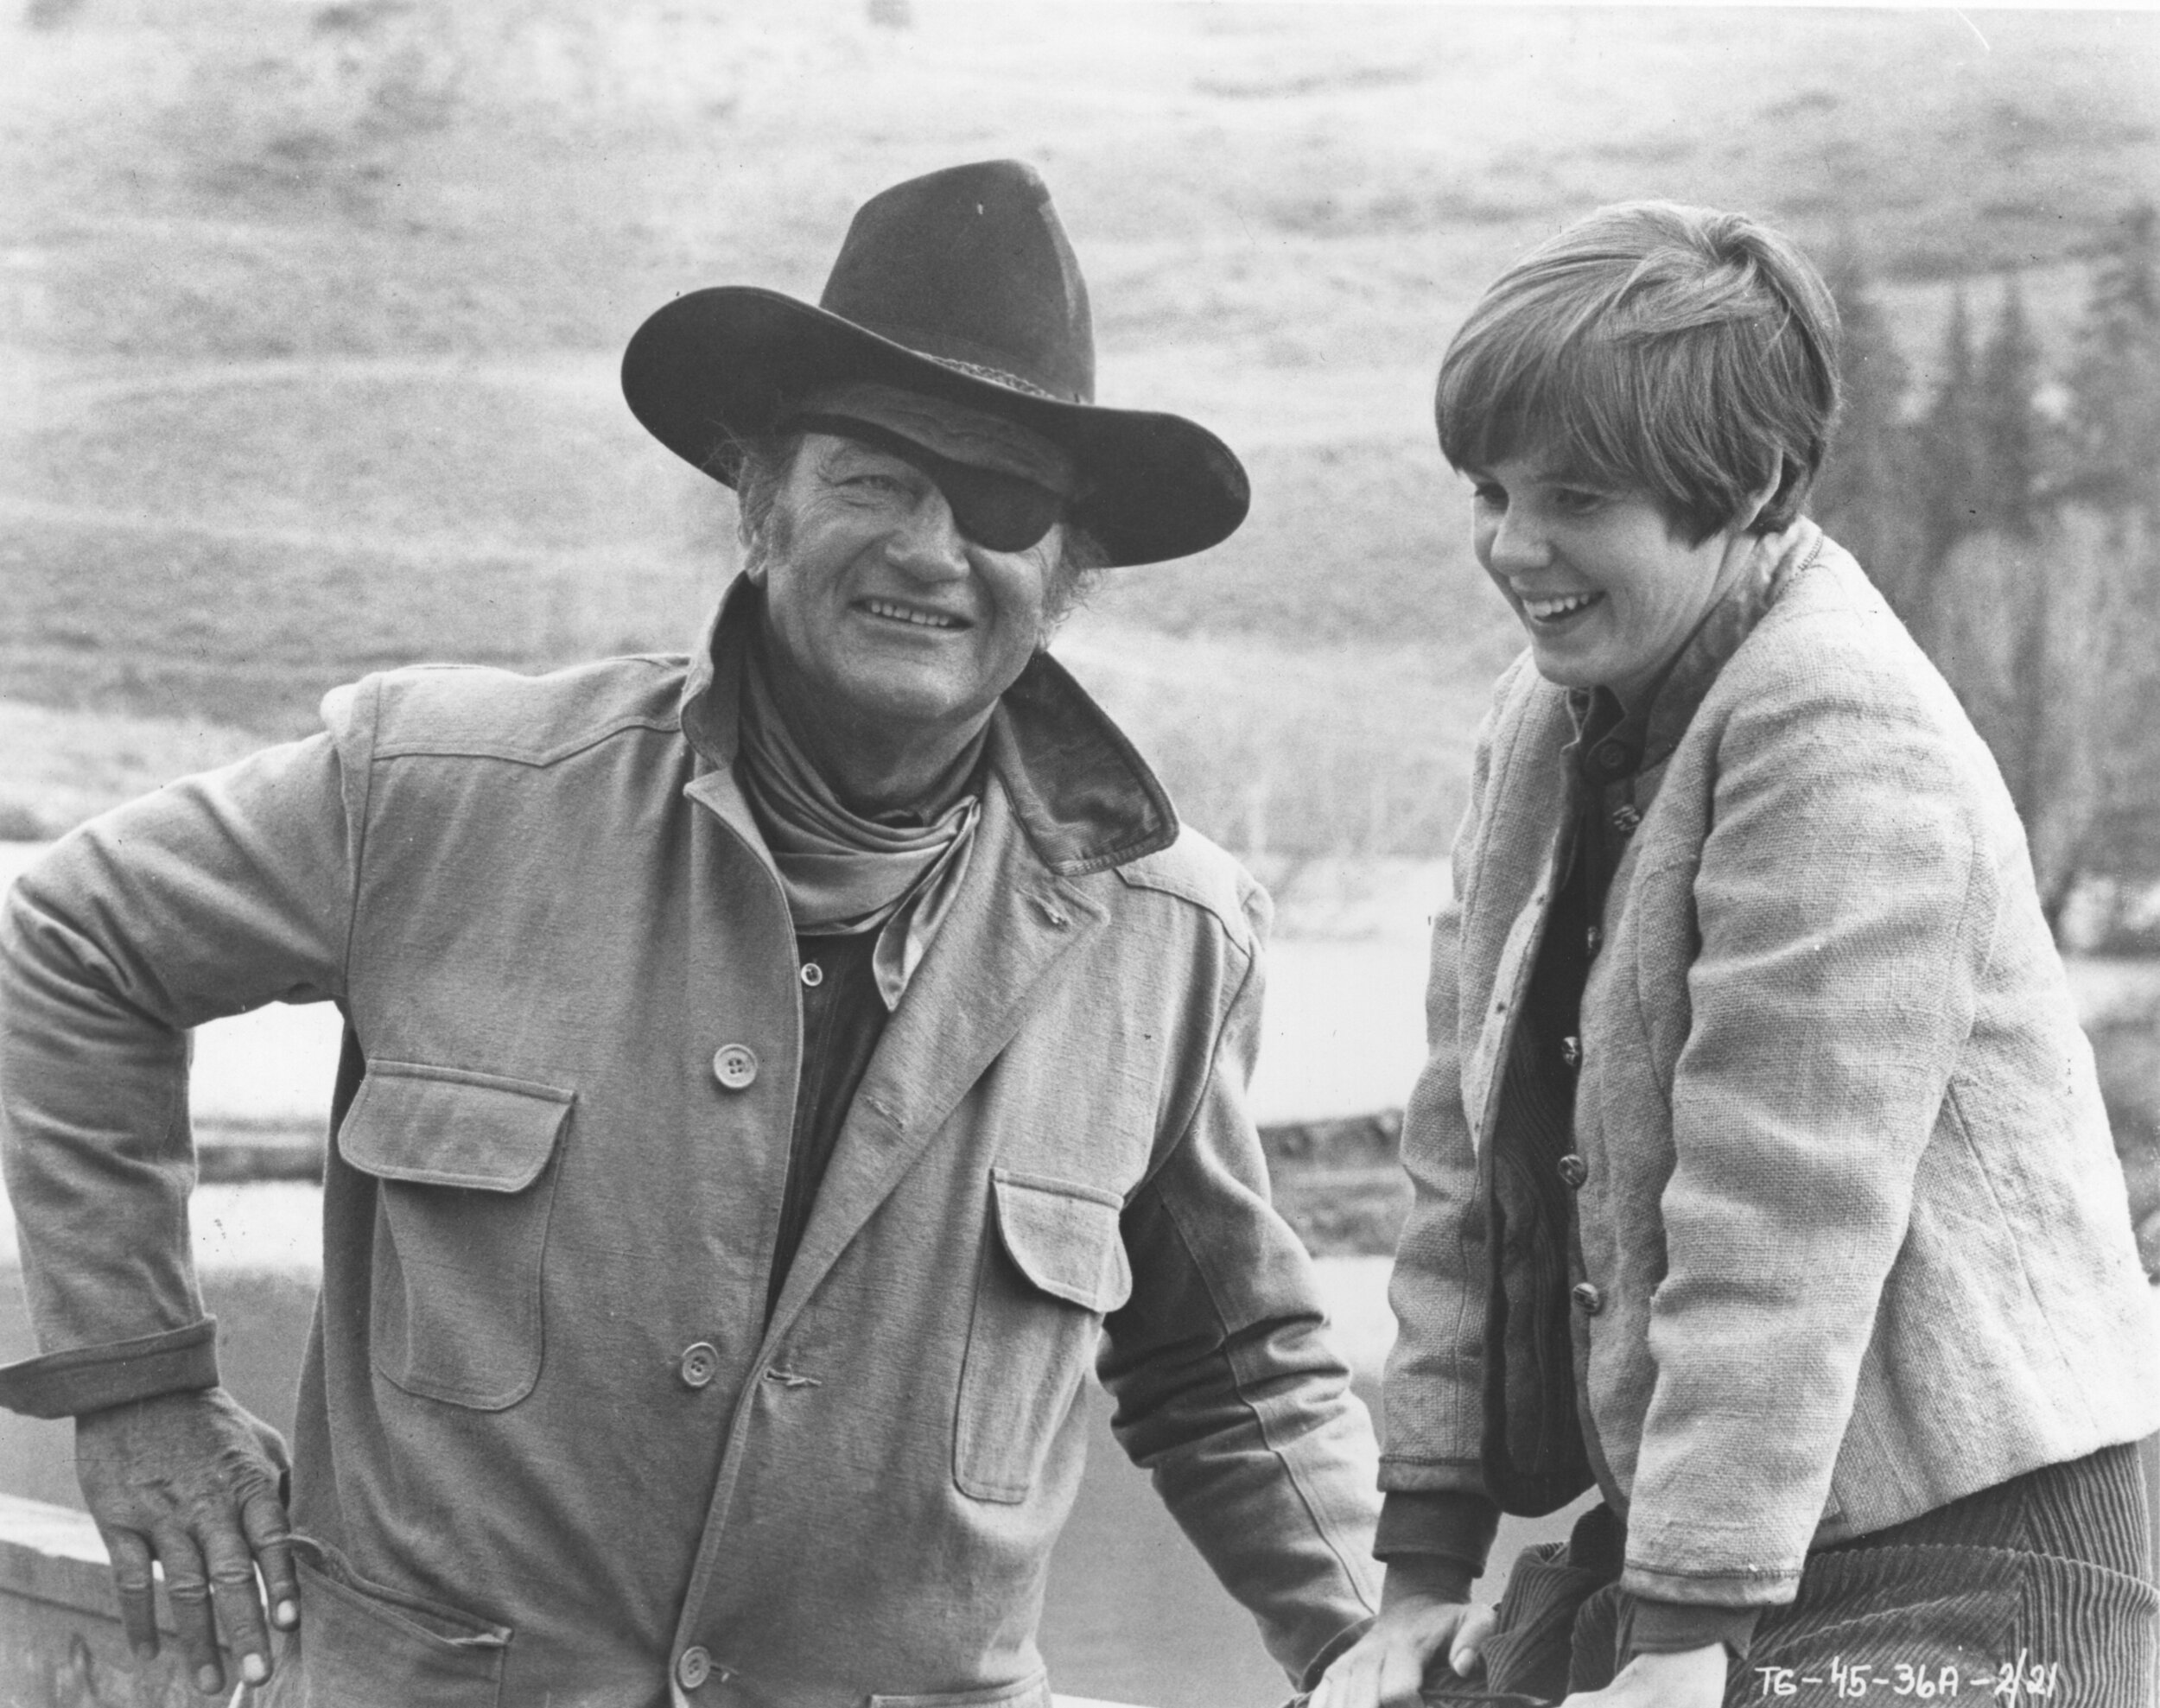 John Wayne (Rooster Cogburn) with Kim Darby on the set of True Grit (1969) in Ridgway, CO.